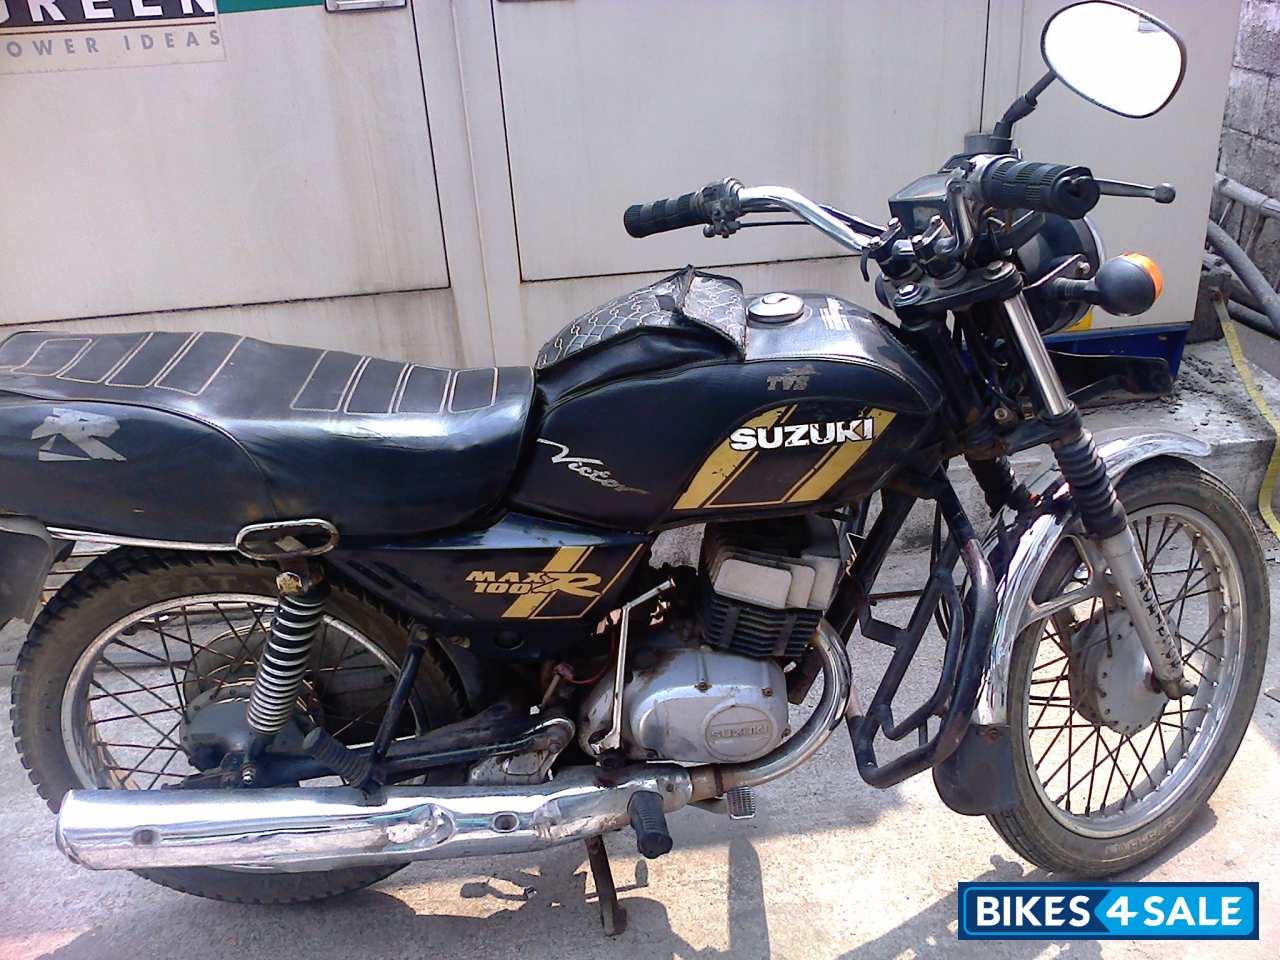 Used 2001 model TVS MAX 100R for sale in Chennai. ID 109193. Black ...